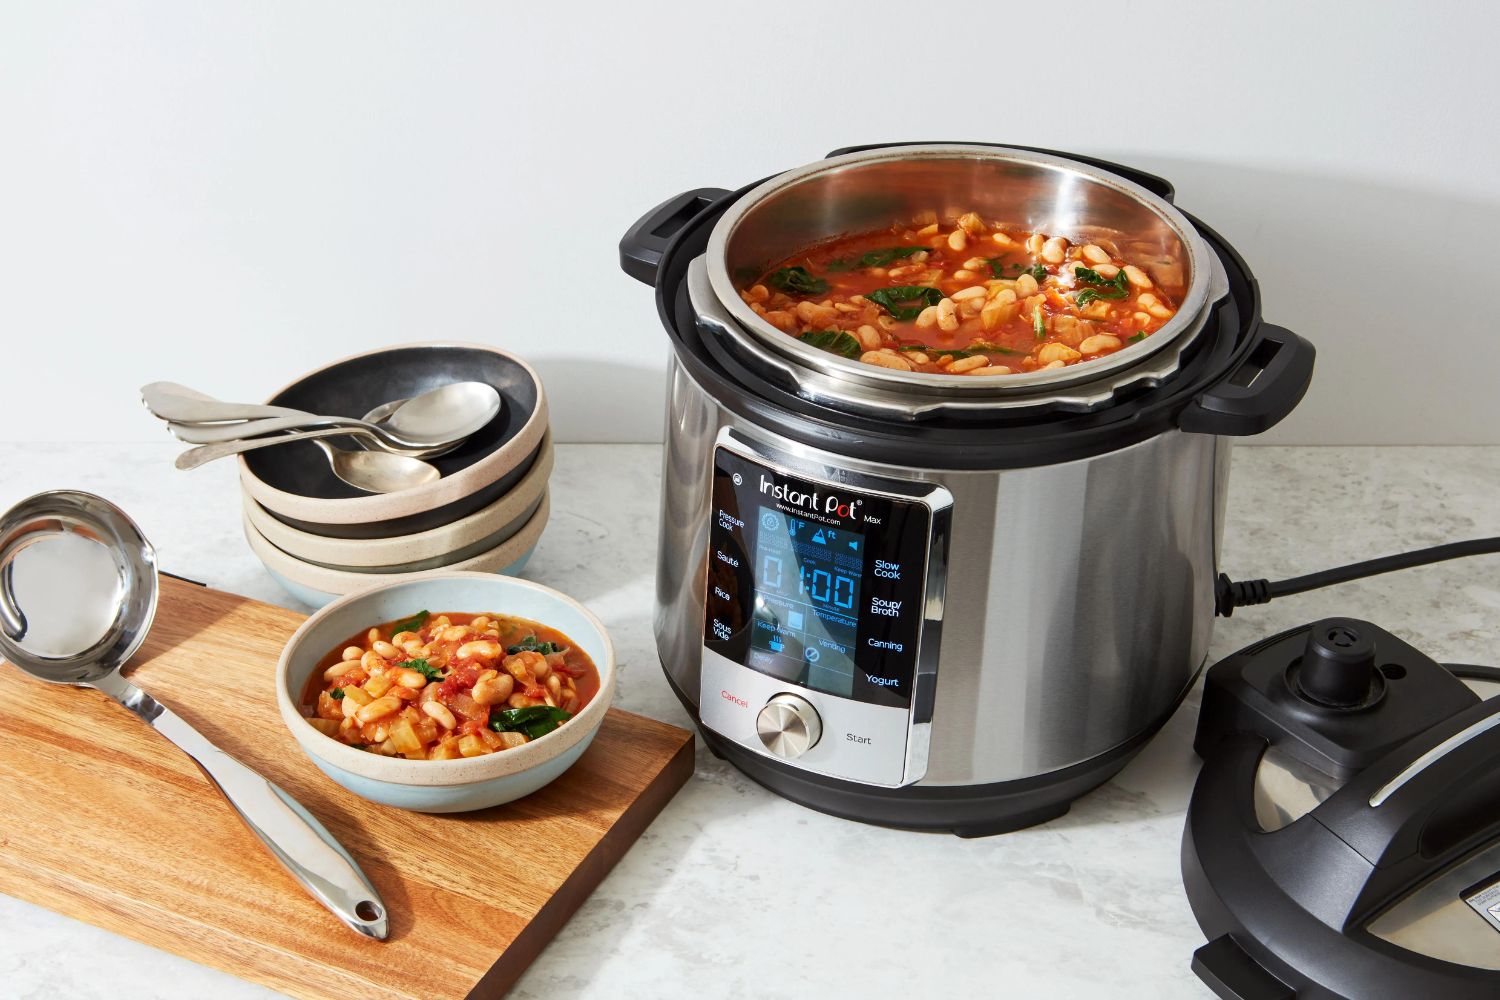 How To Cook Chickpeas In An Electric Pressure Cooker